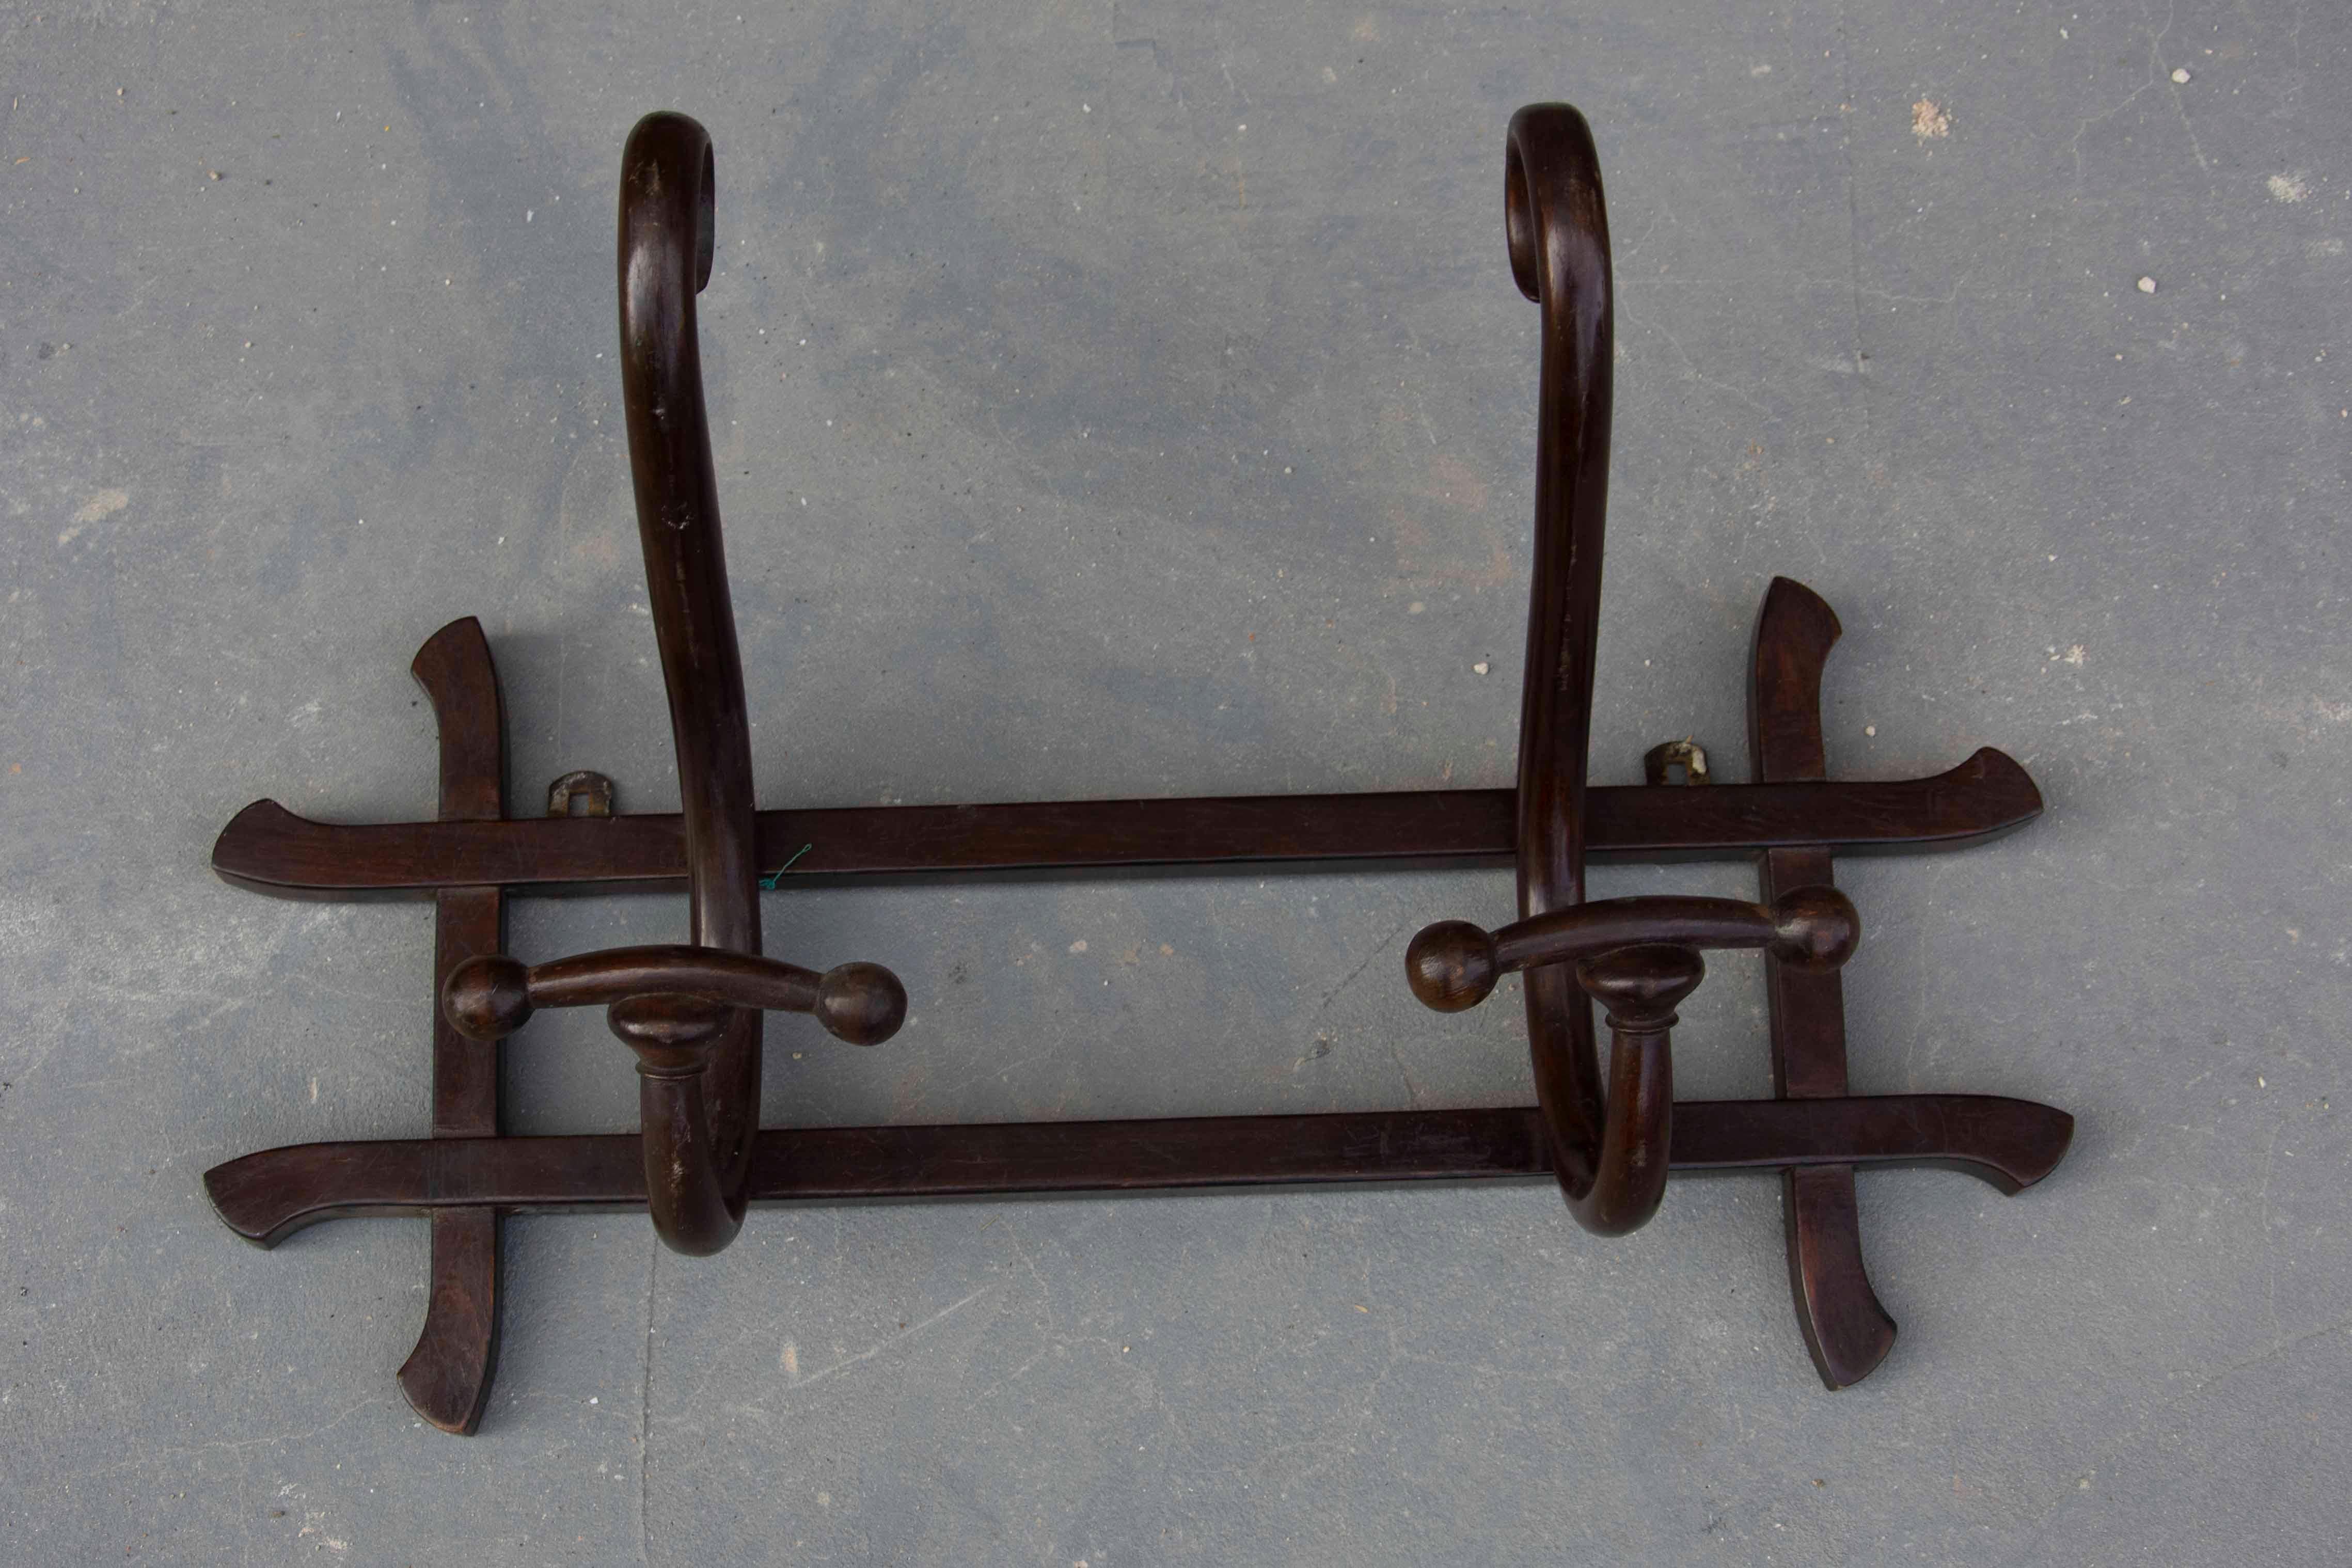 Original Austrian Art Nouveau bentwood wall coat rack by Thonet. Seldom-seen piece. It was made in Vienna, circa 1900. 
The Thonet brand is embossed on the back. The coat hanger is in a very good vintage state.